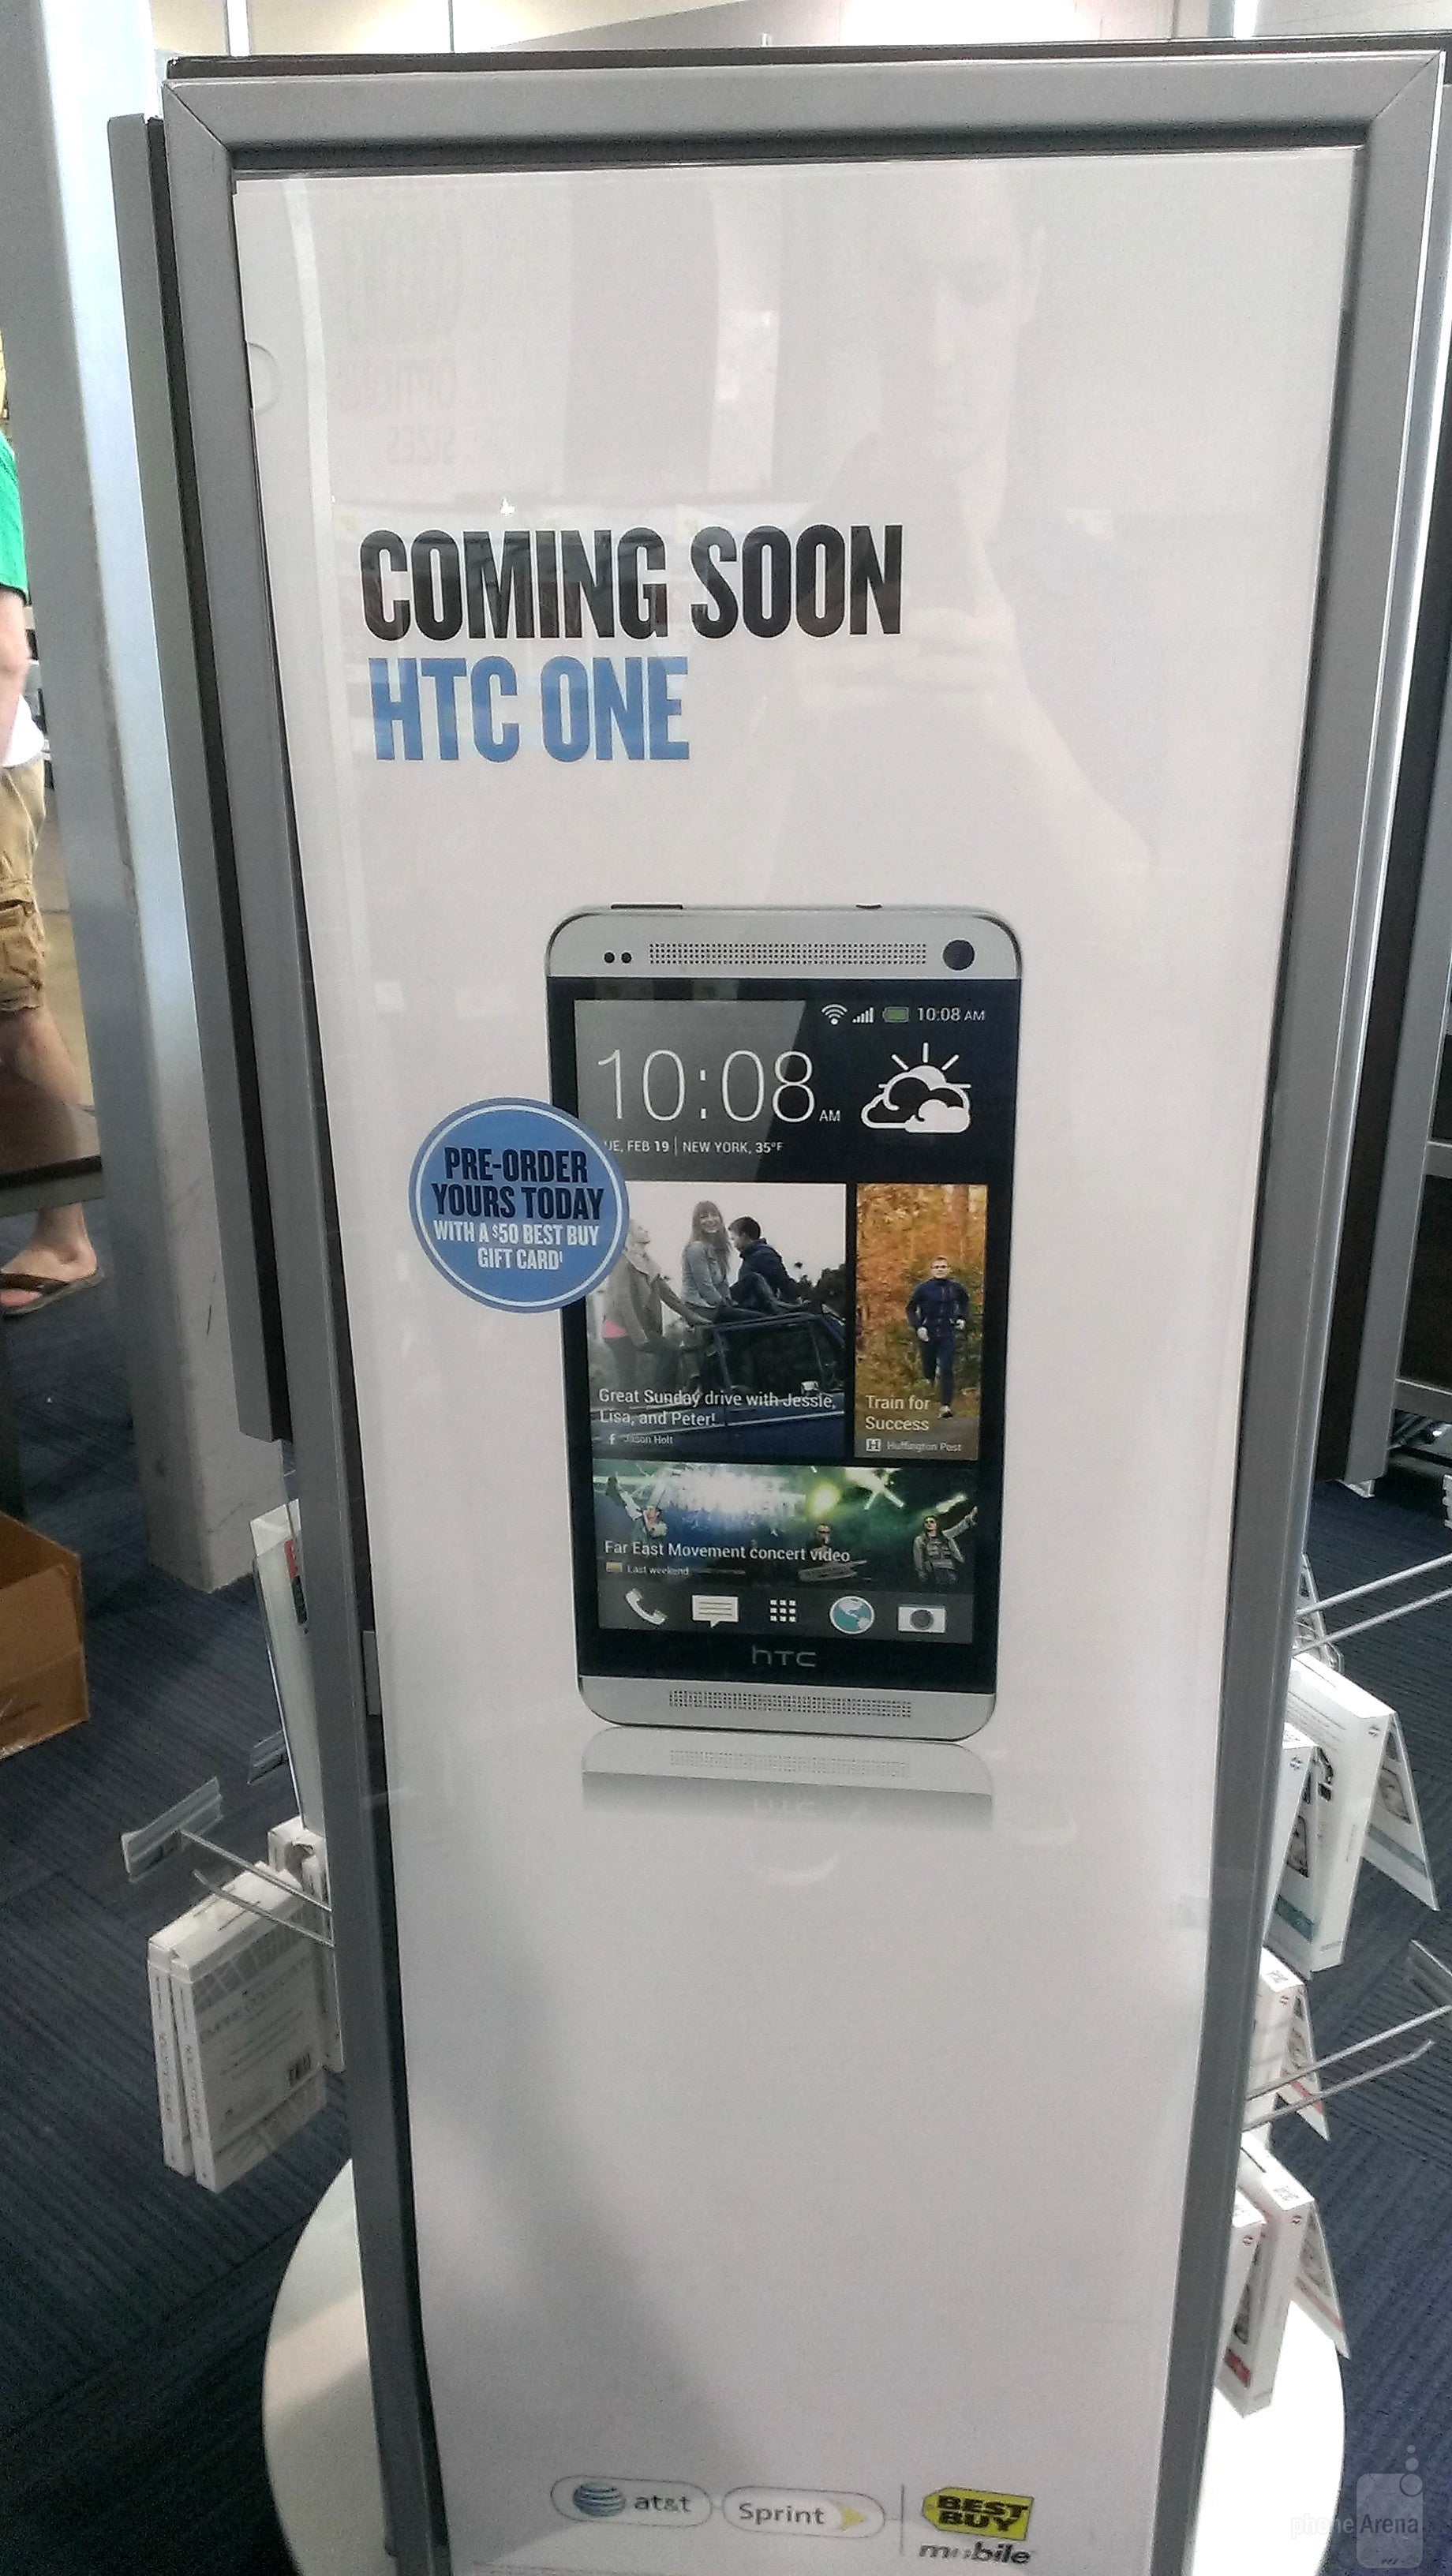 Best Buy teases the upcoming launch of HTC One